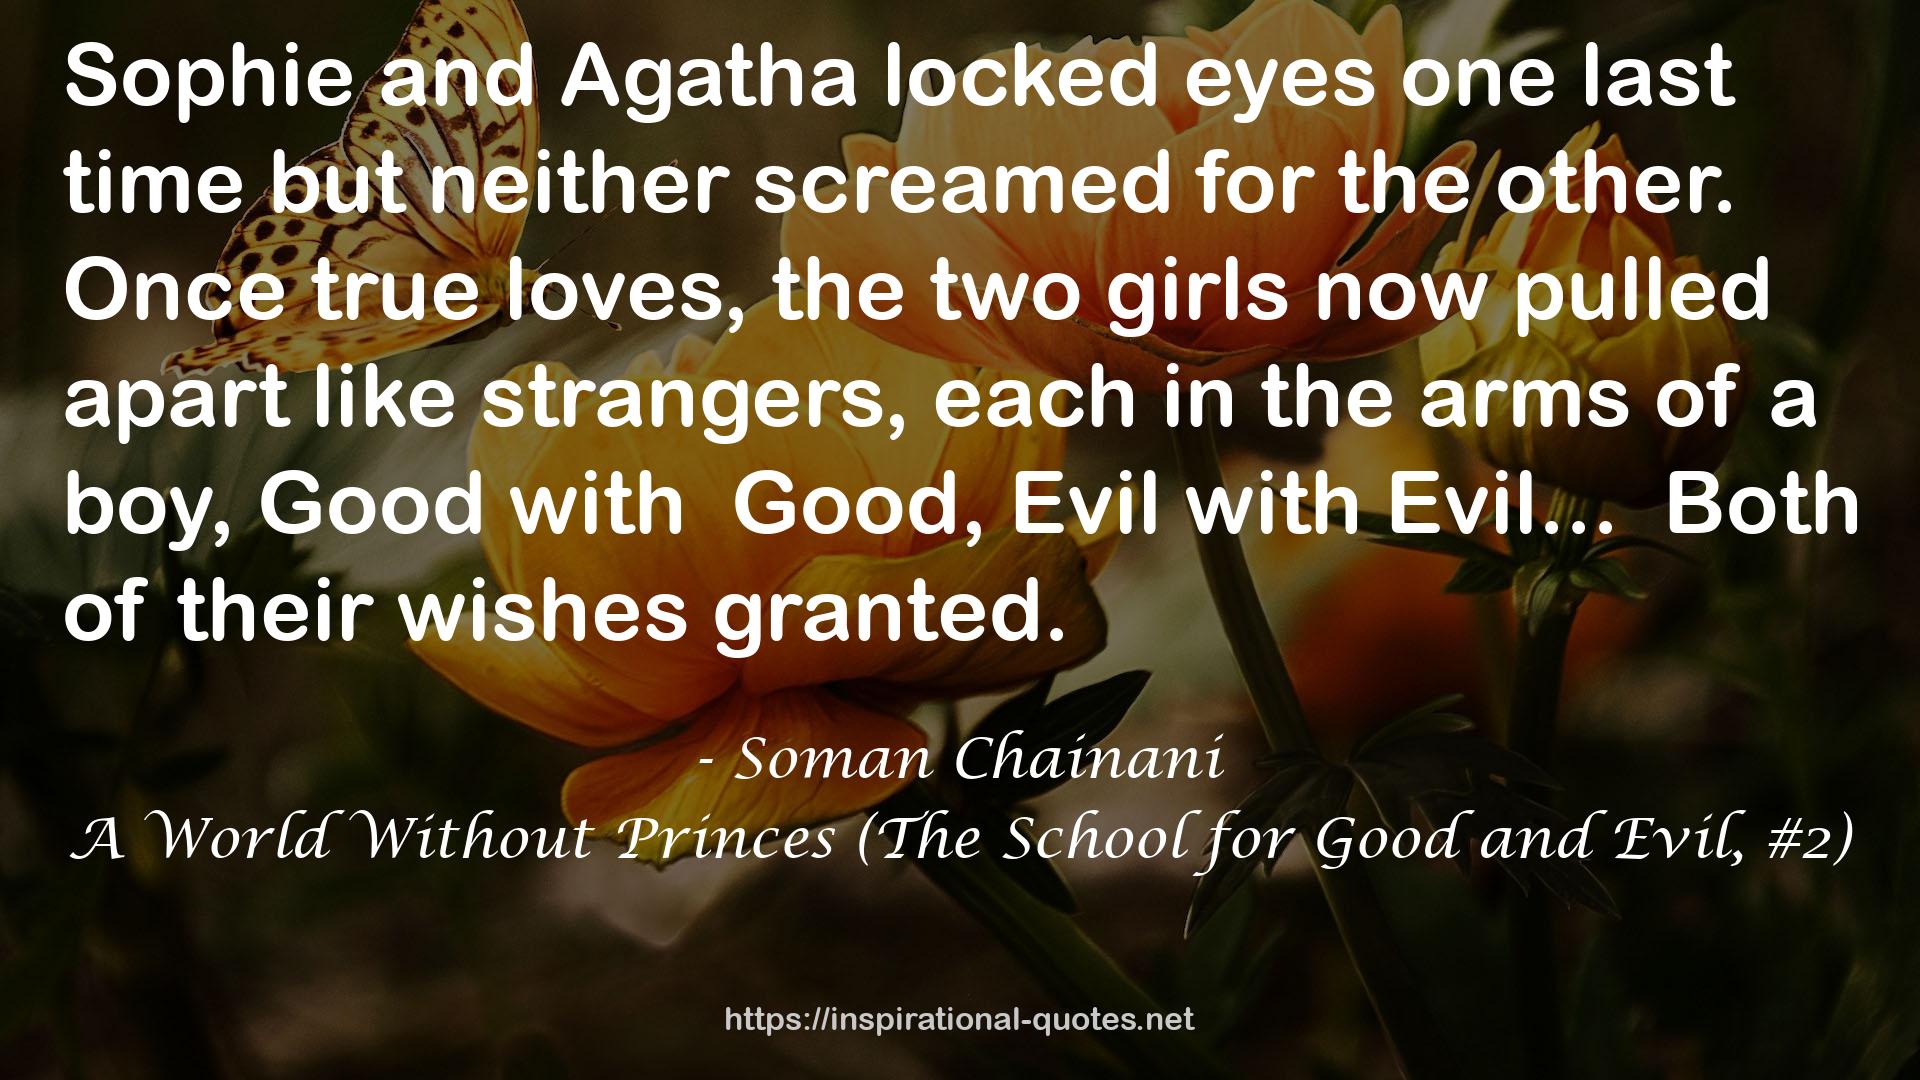 A World Without Princes (The School for Good and Evil, #2) QUOTES